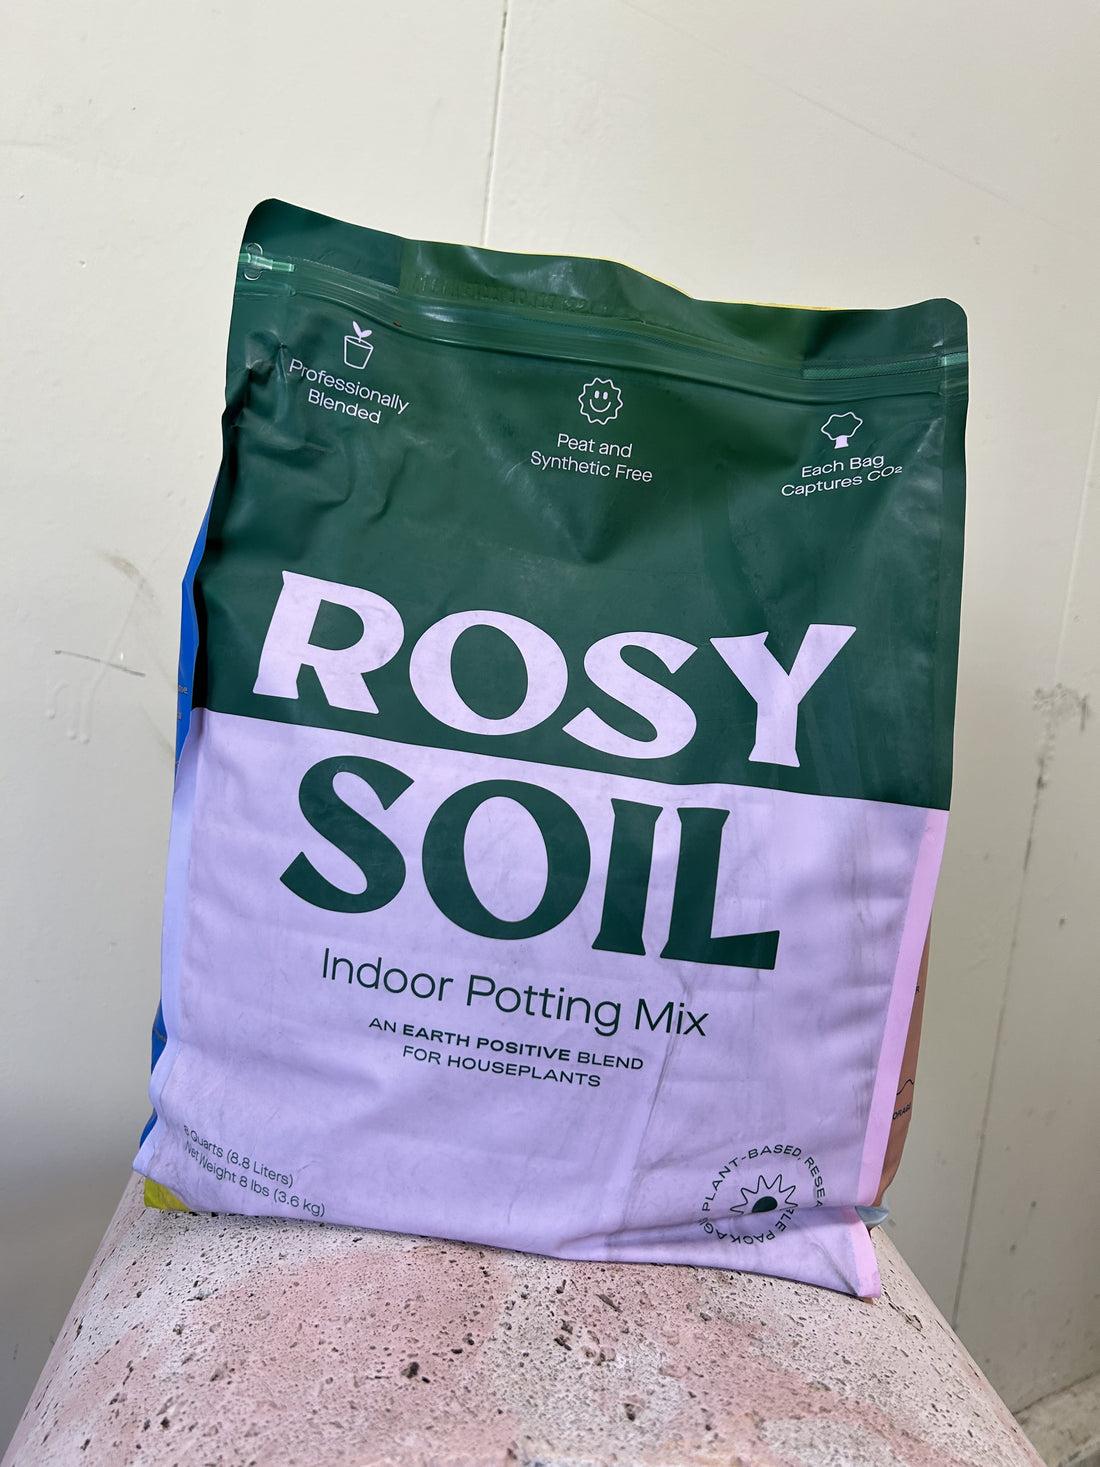 Earth Positive Indoor Potting Mix